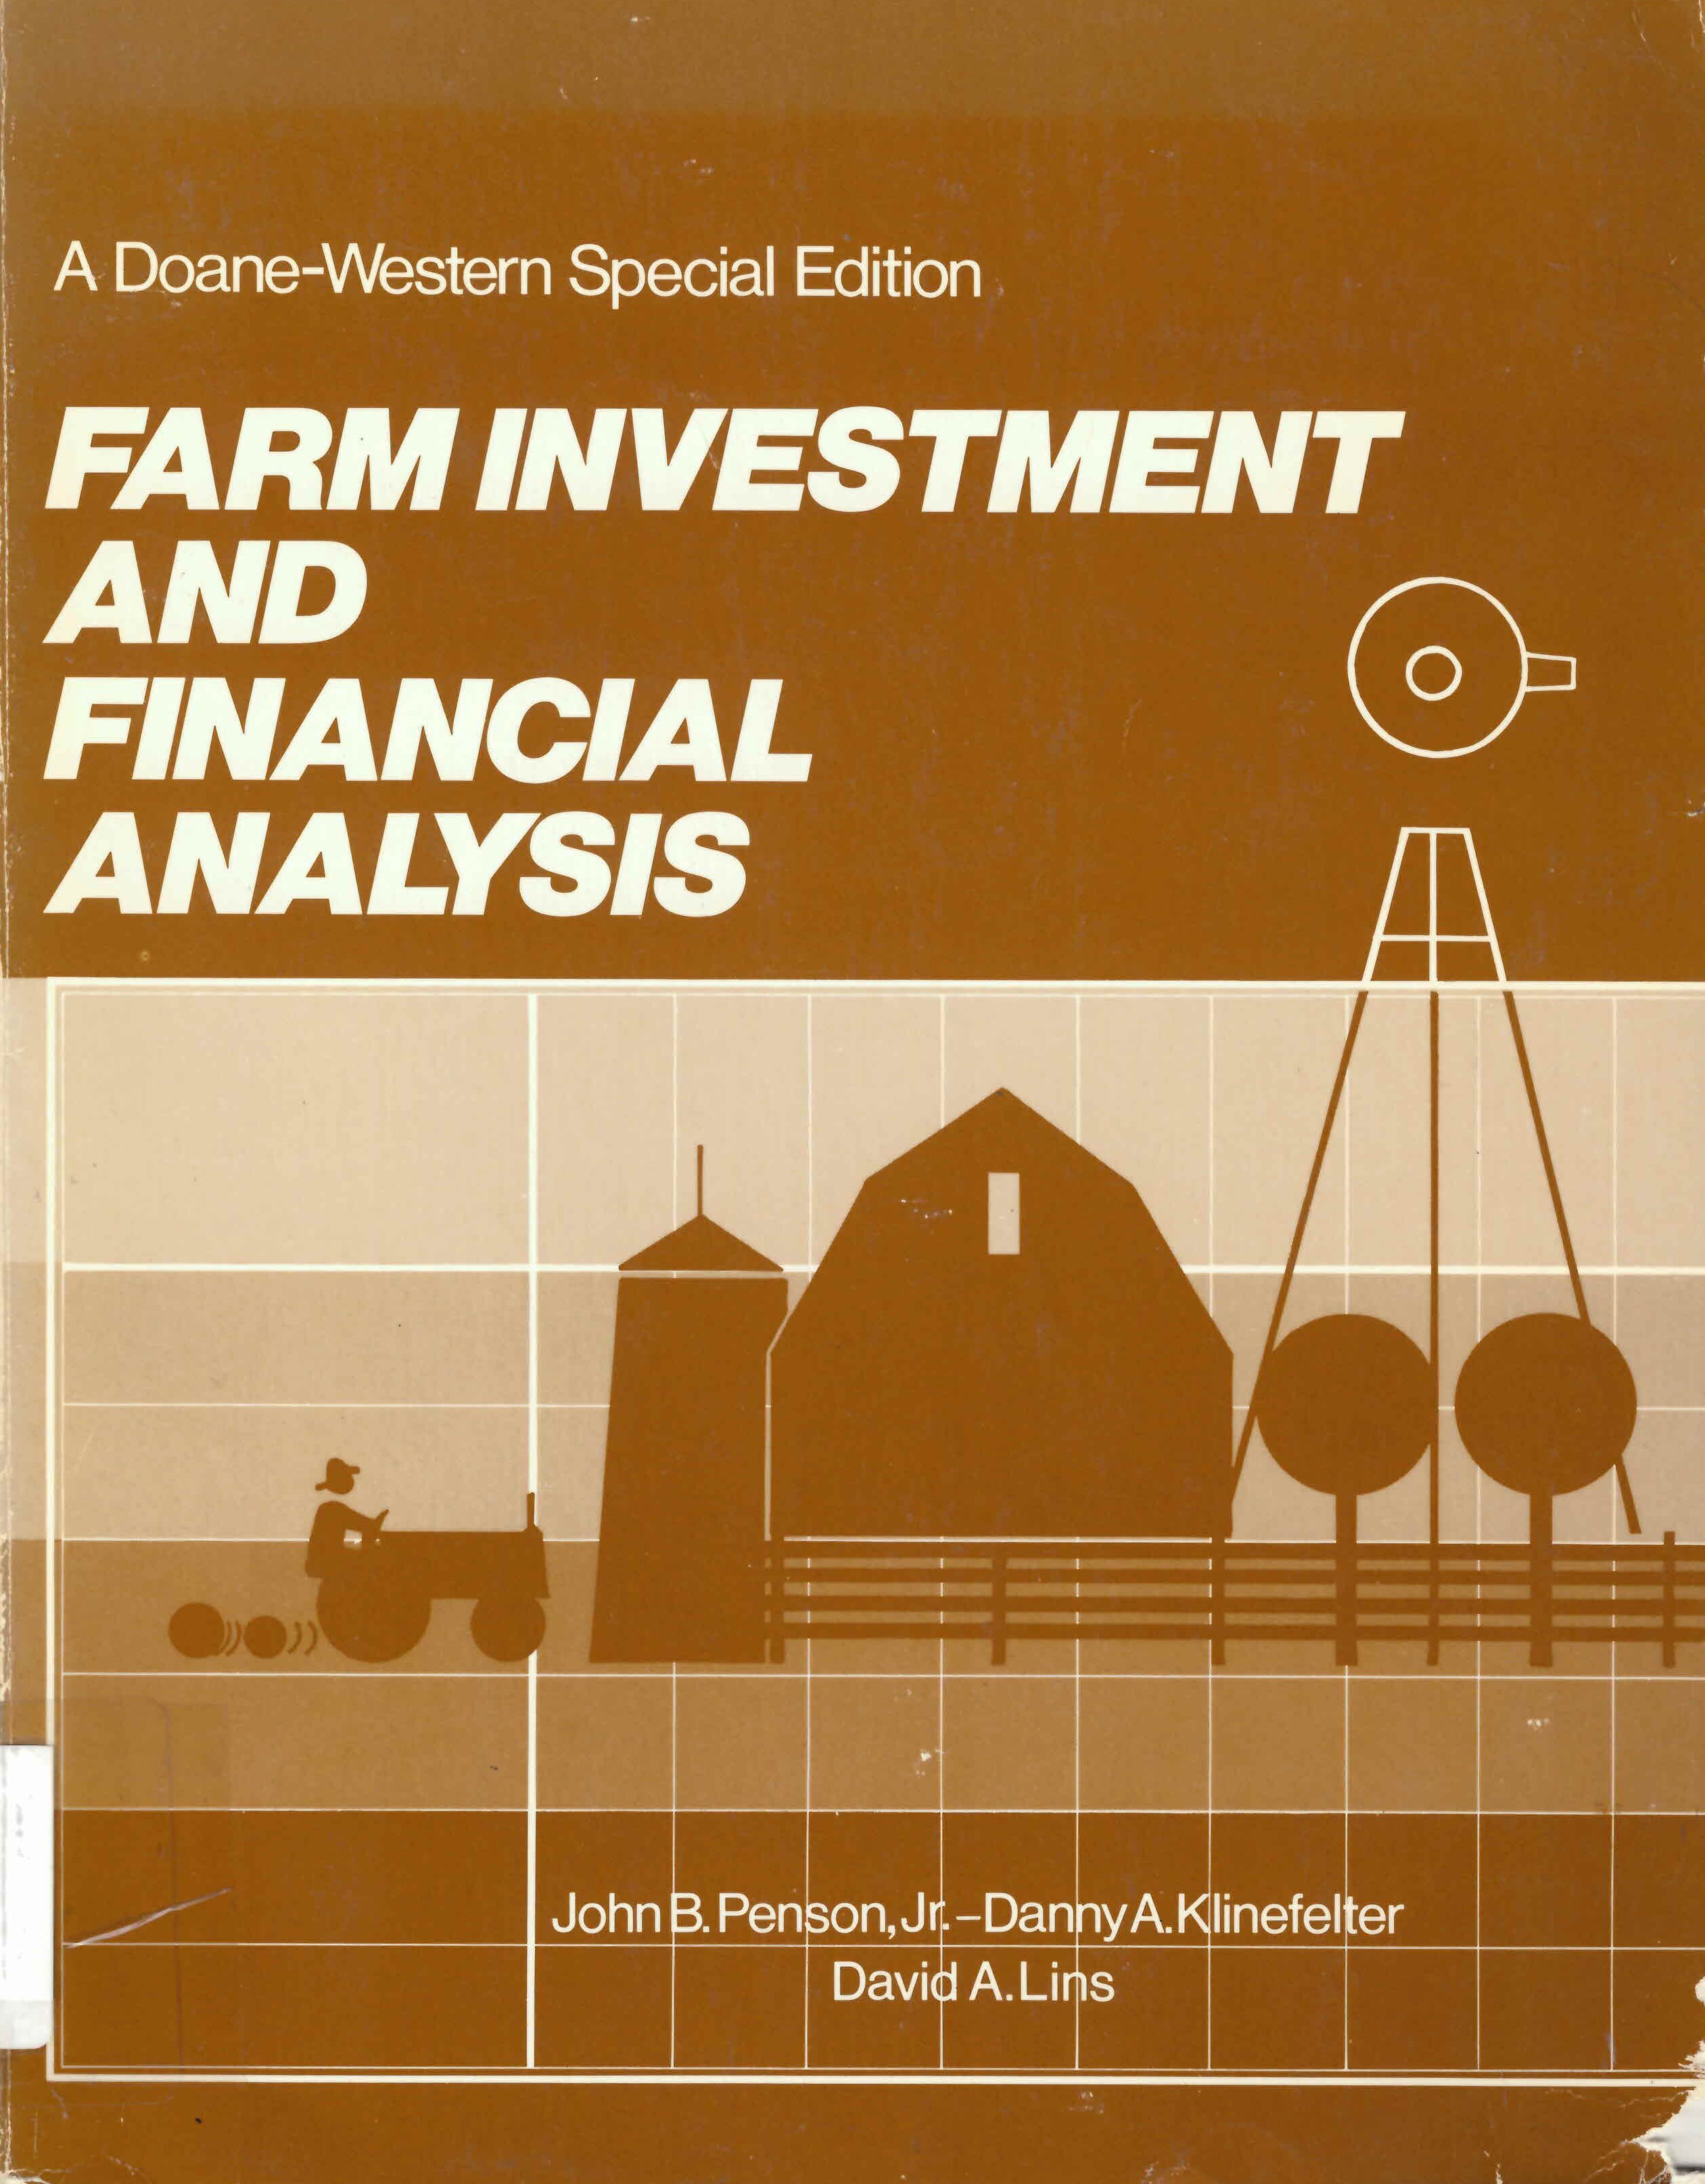 Farm investment and financial analysis